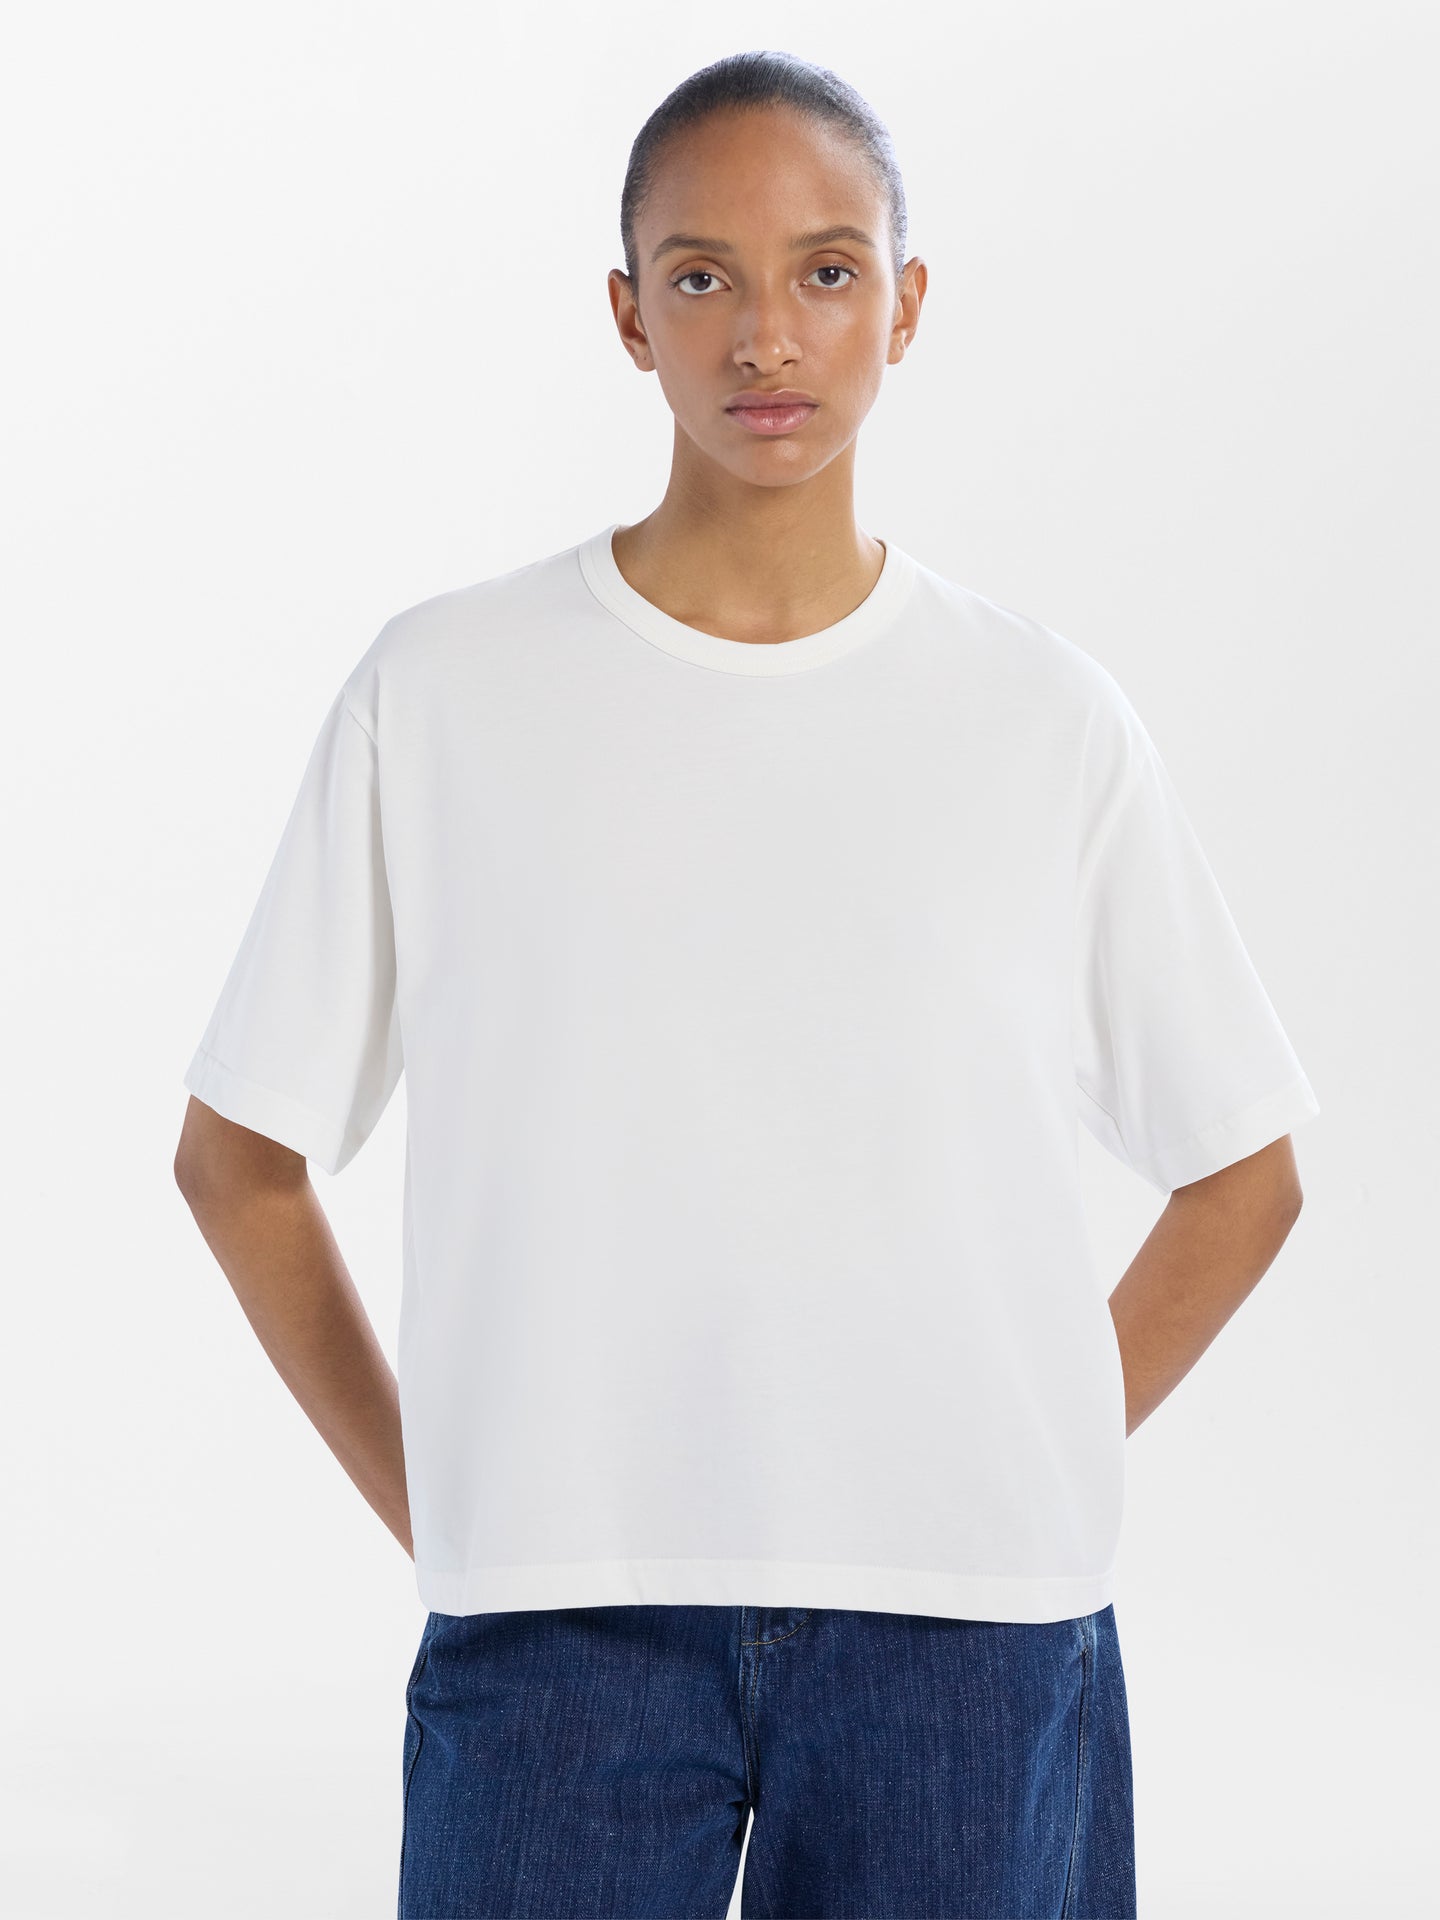 Lee T-Shirt in Optic White